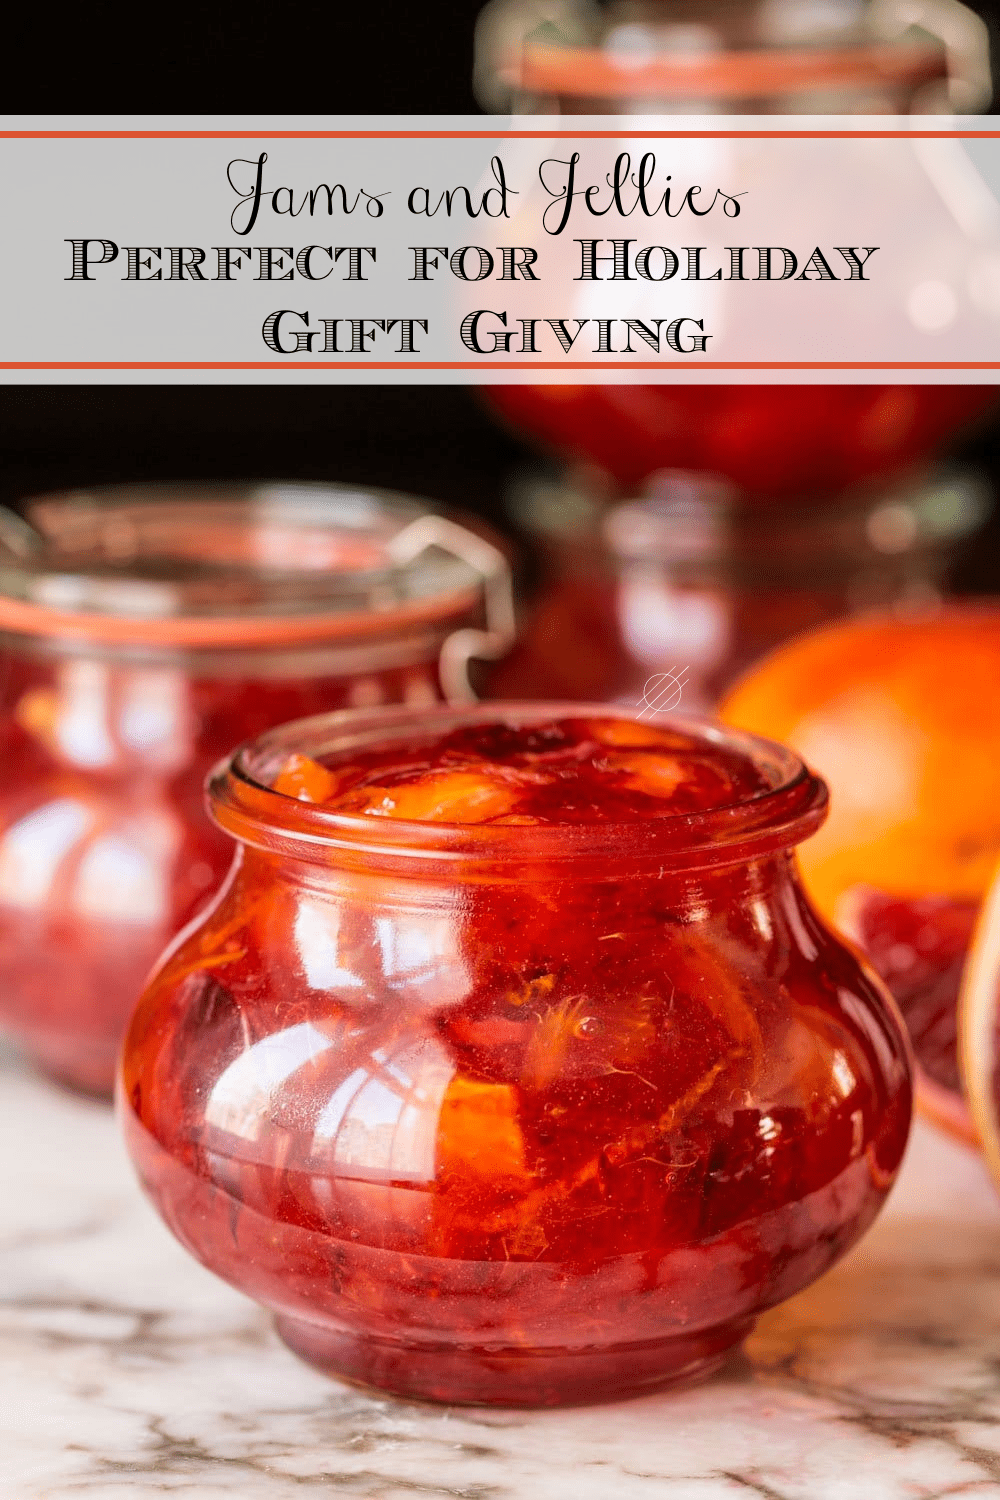 Jams and Jellies to Make Now for Gifts and Entertaining